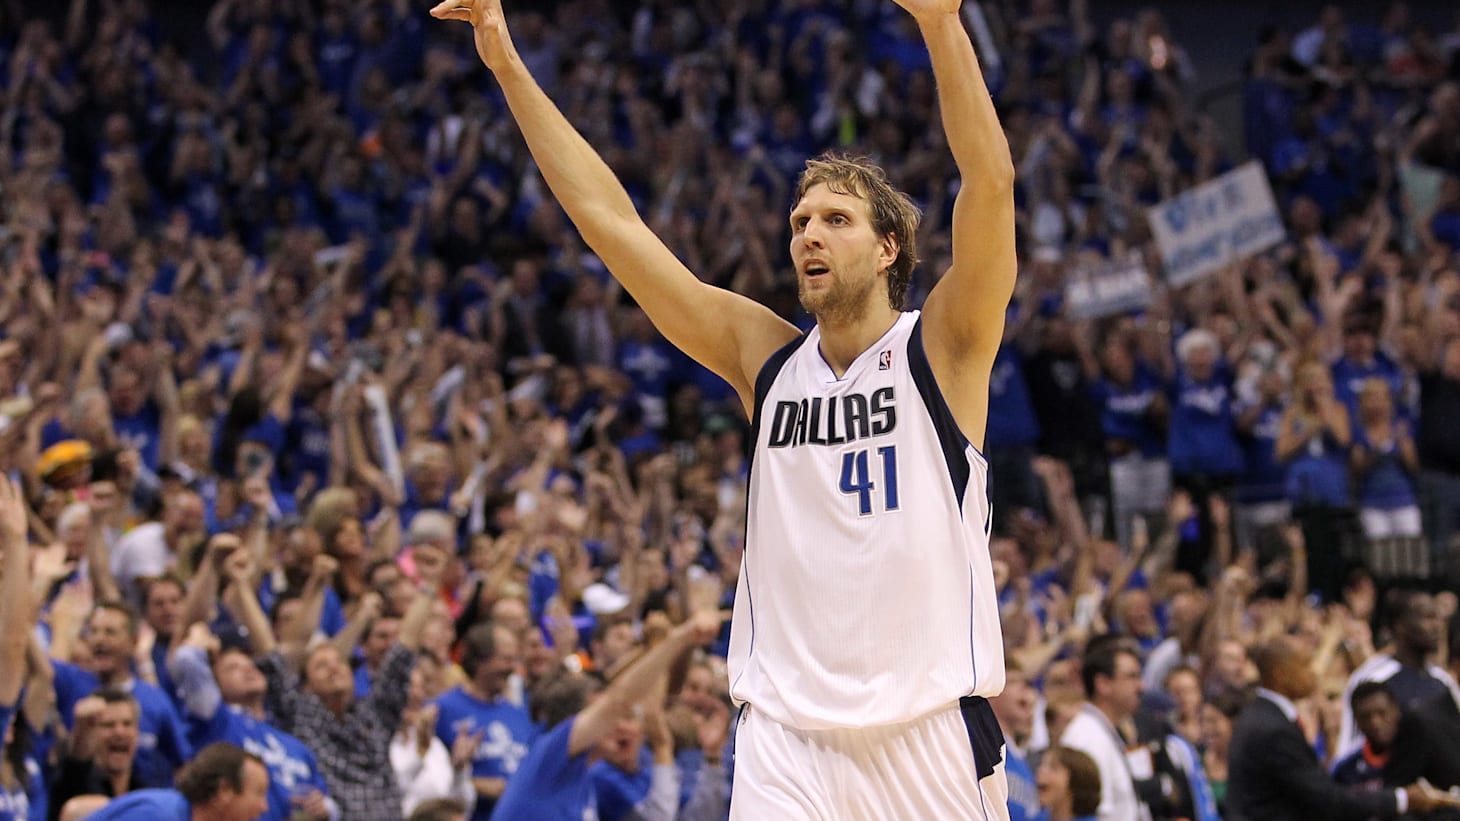 German basketball player Dirk Nowitzki in action during the